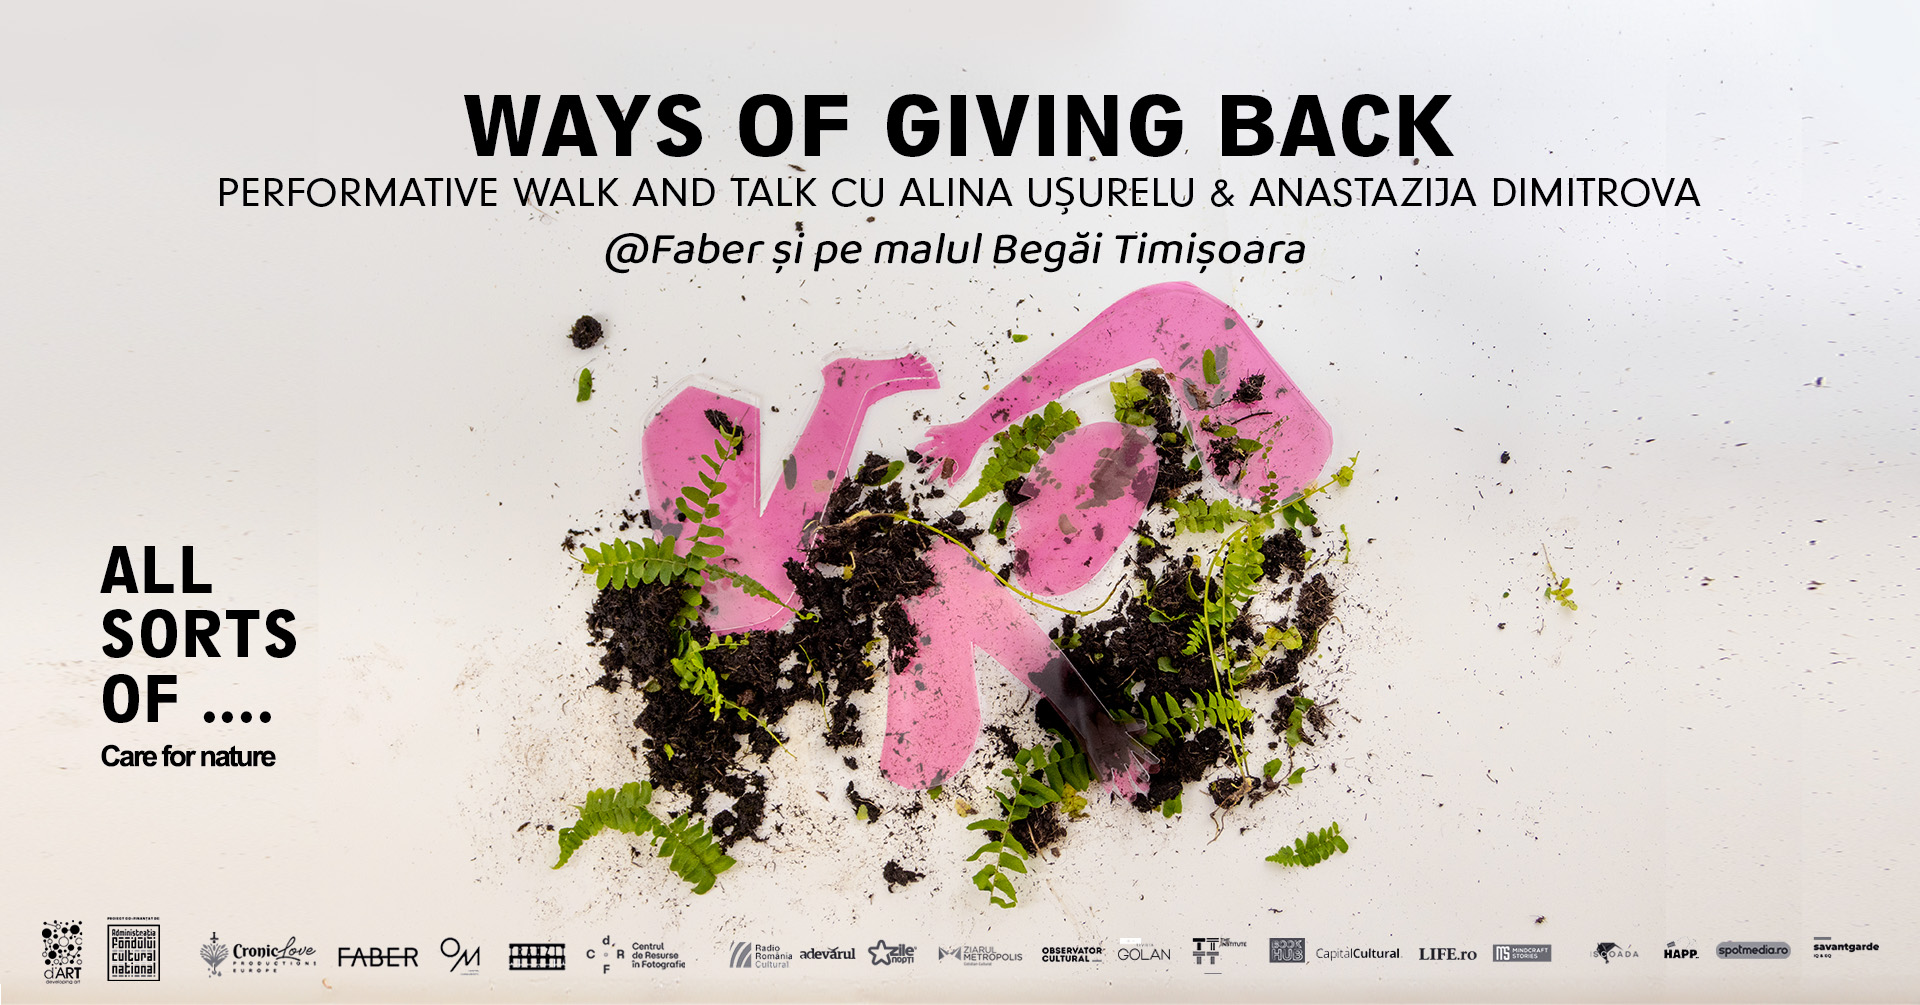 All Sorts of...Care for Nature - Ways of Giving Back - performative walk and talk